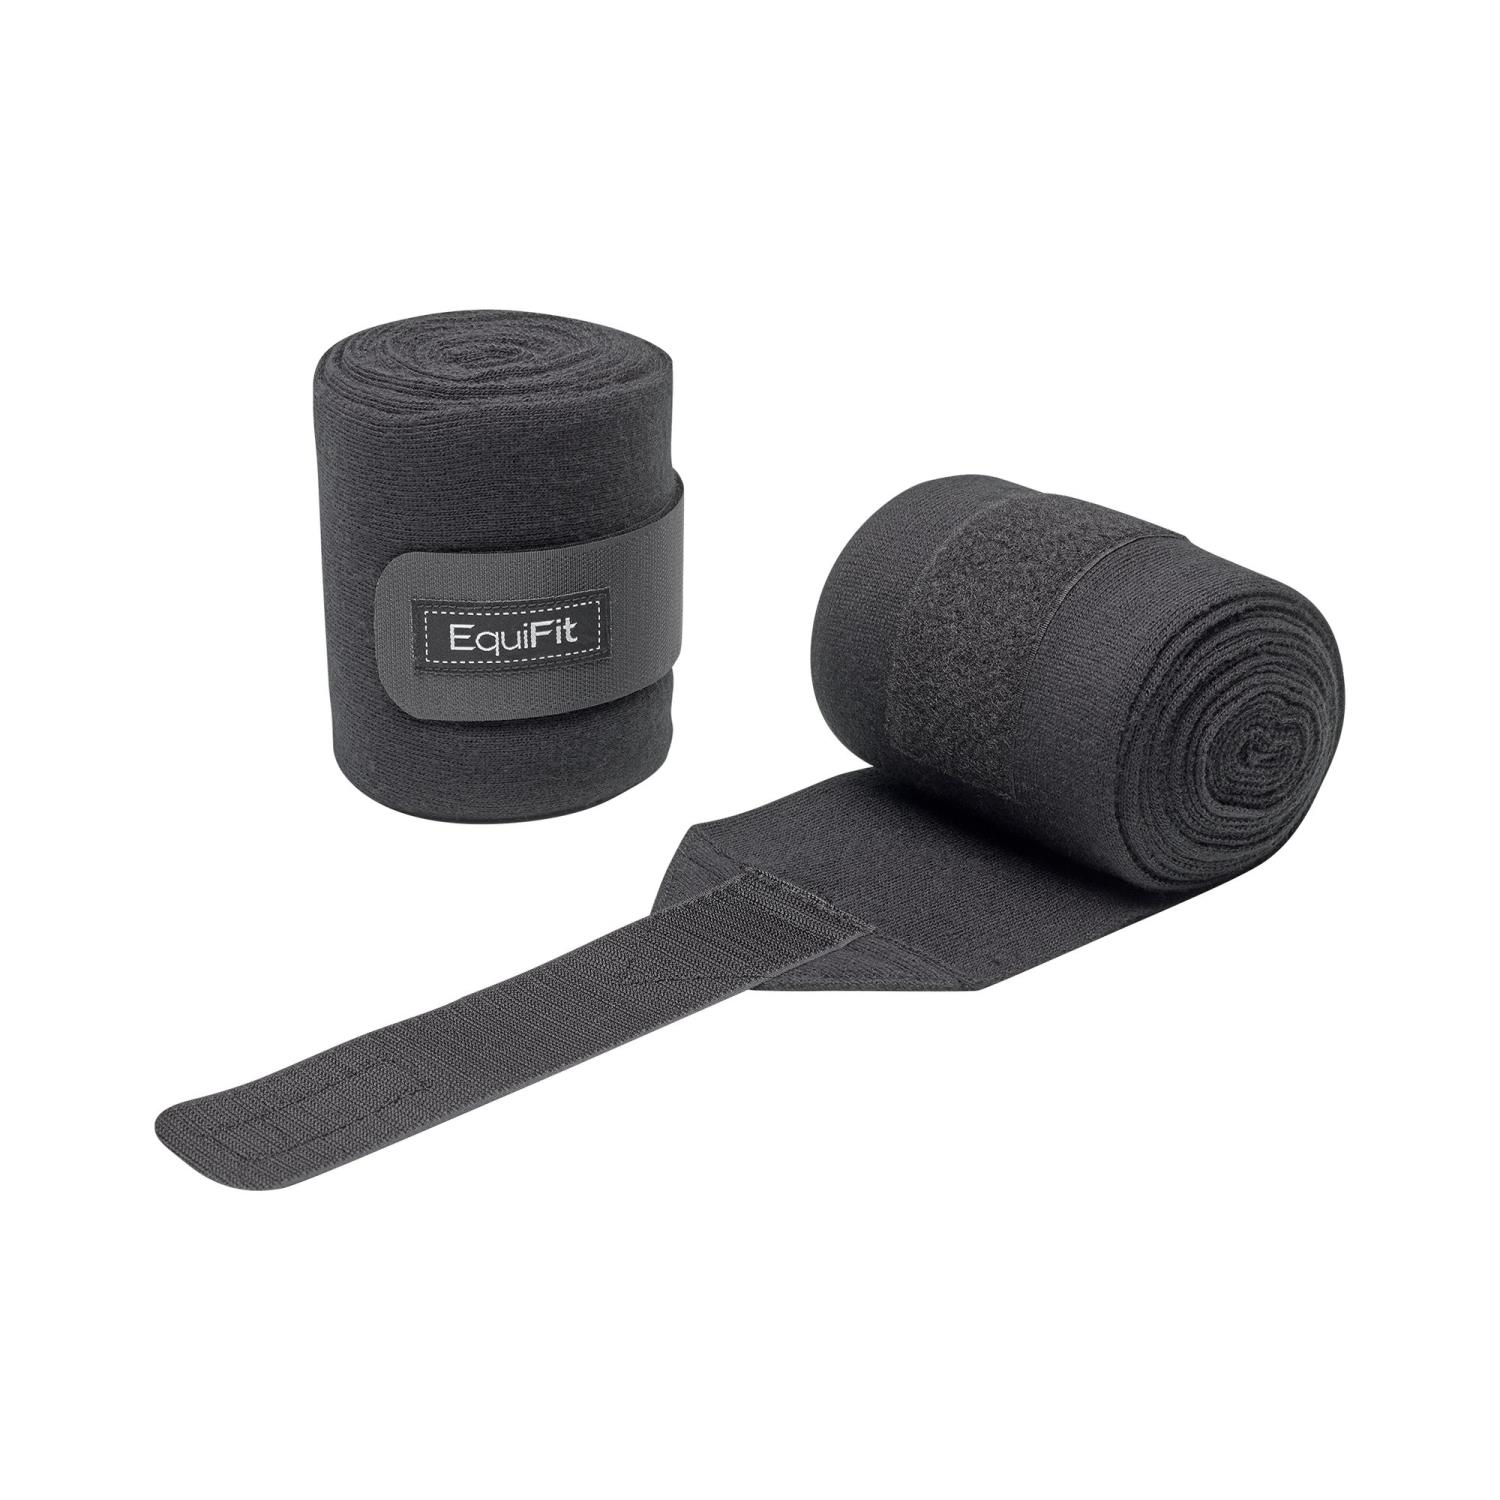 EquiFit standing bandage